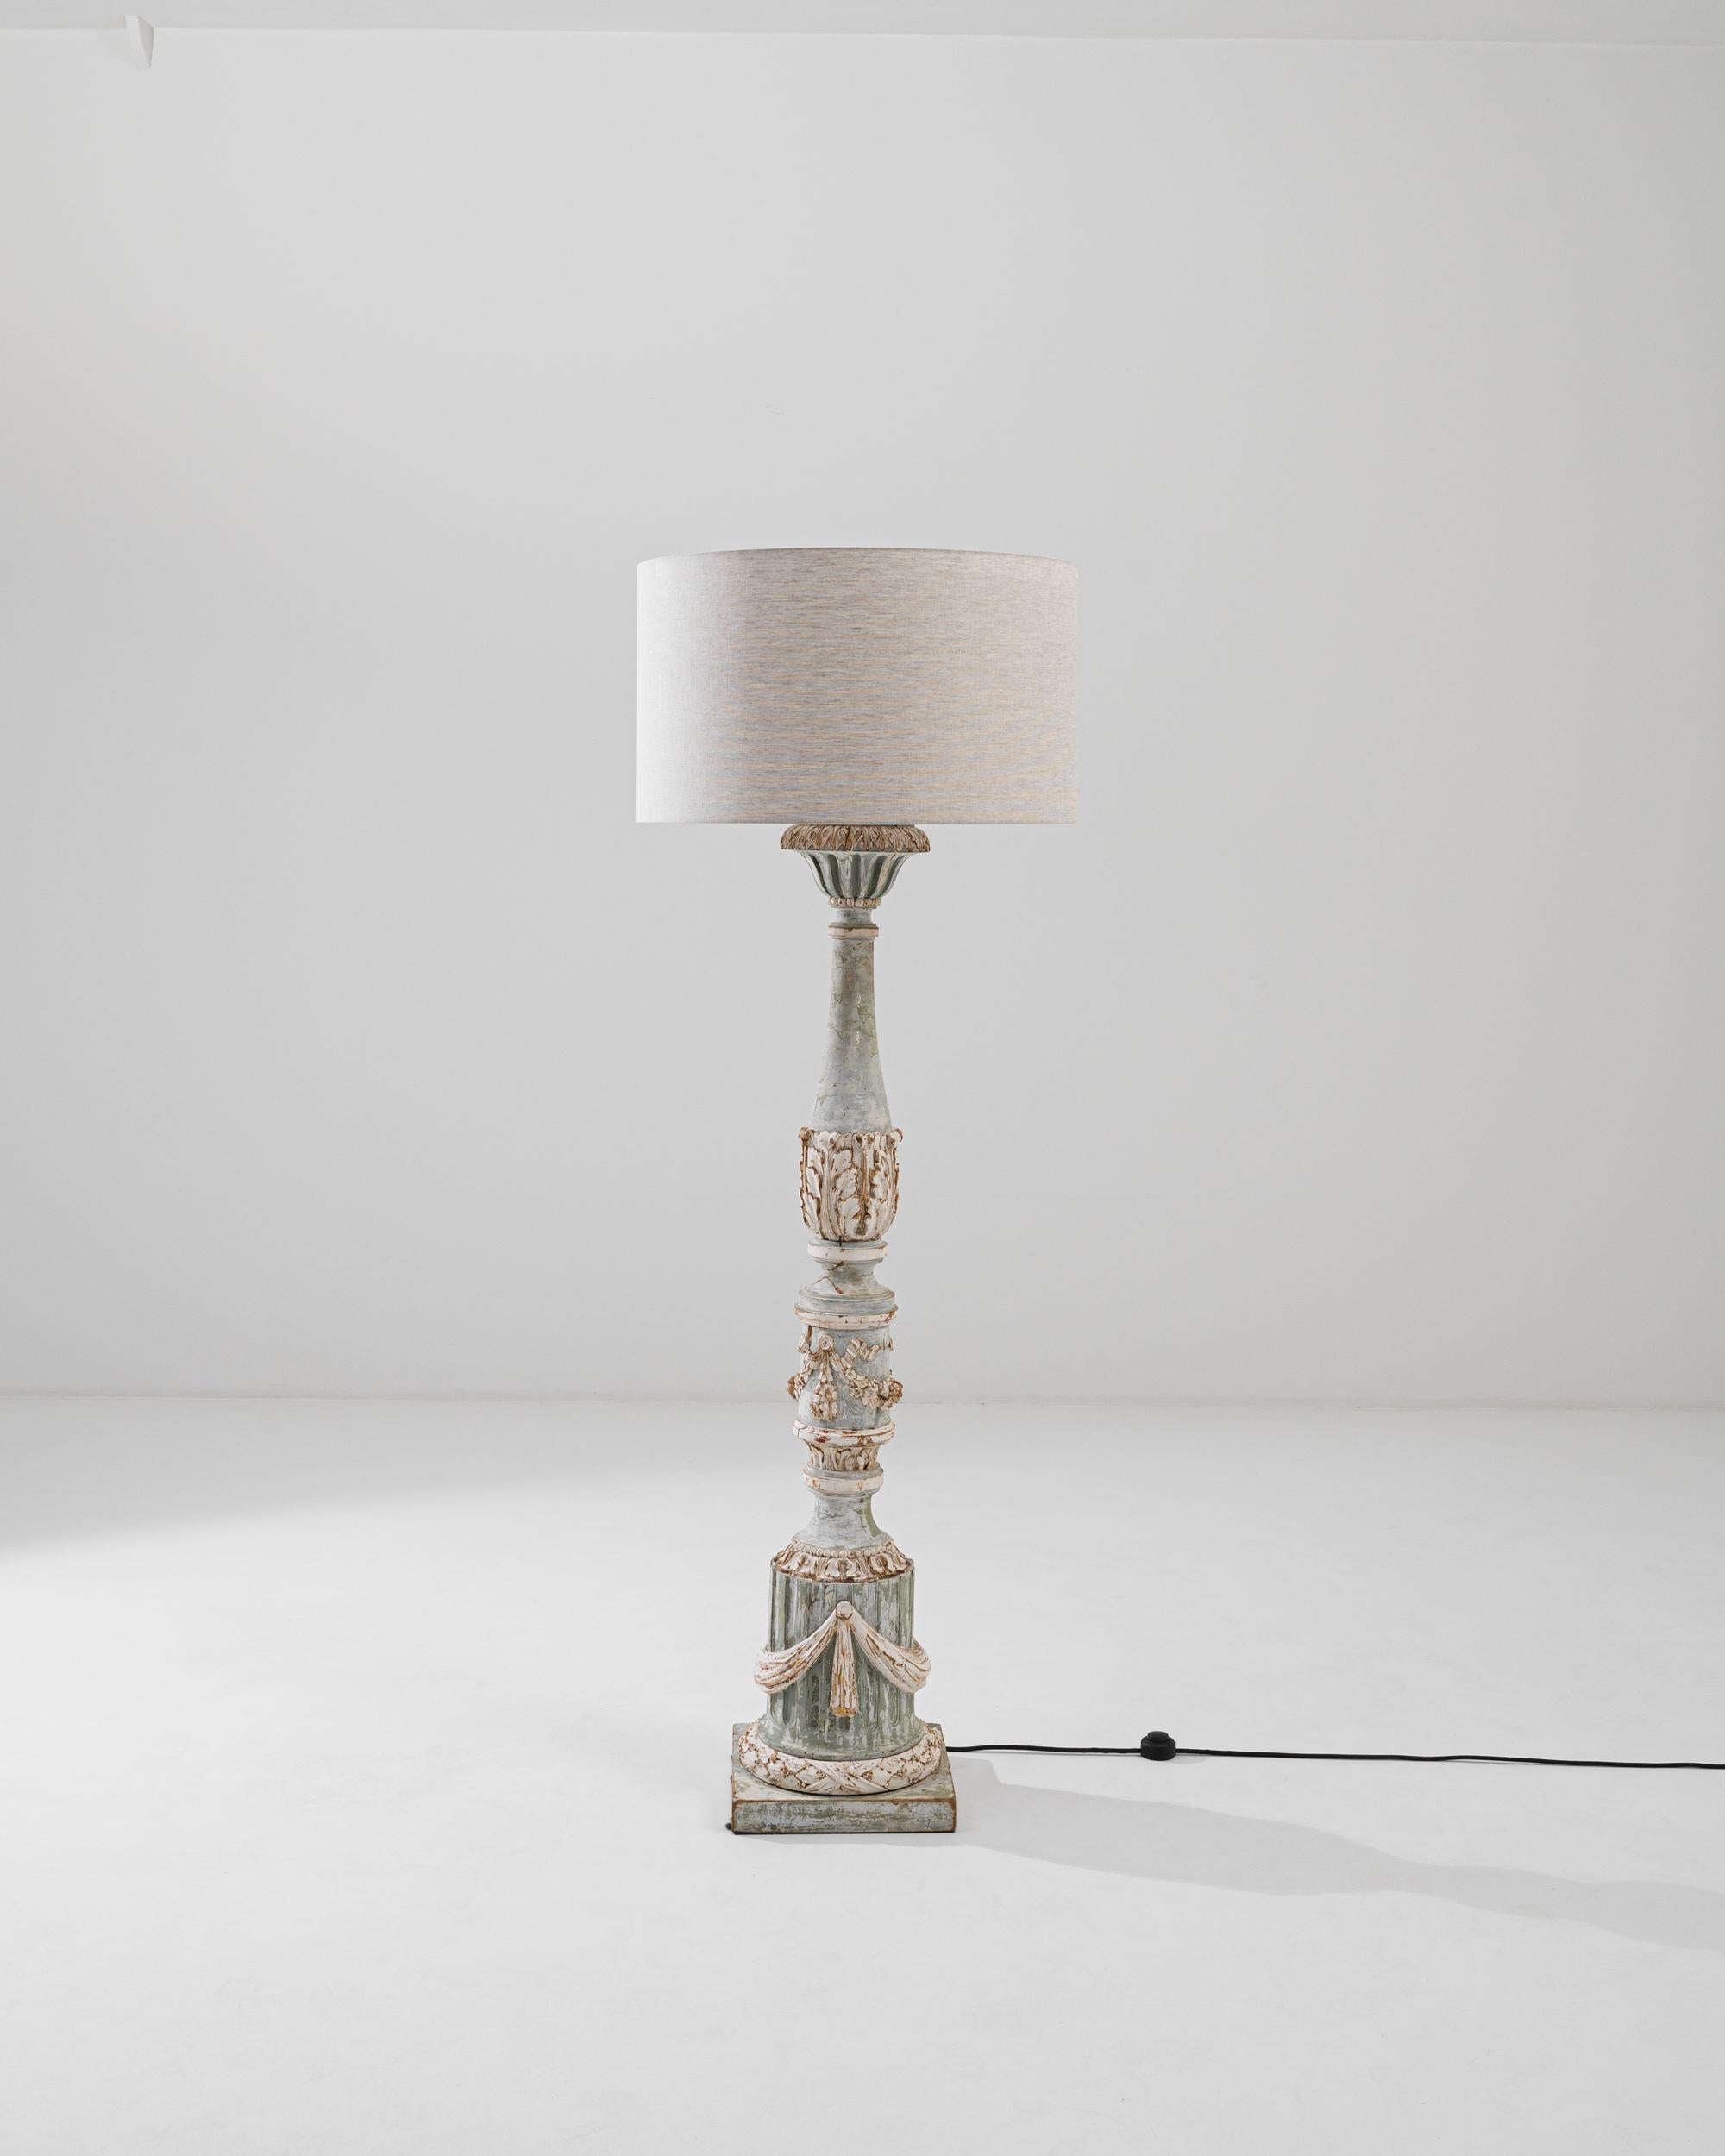 Delicate and ornate, this carved wooden floor lamp brings an element of French whimsy to an interior. Made at the turn of the century, the design offers an elaborate interpretation of Neoclassical motifs. The fluted column of the base is hung with